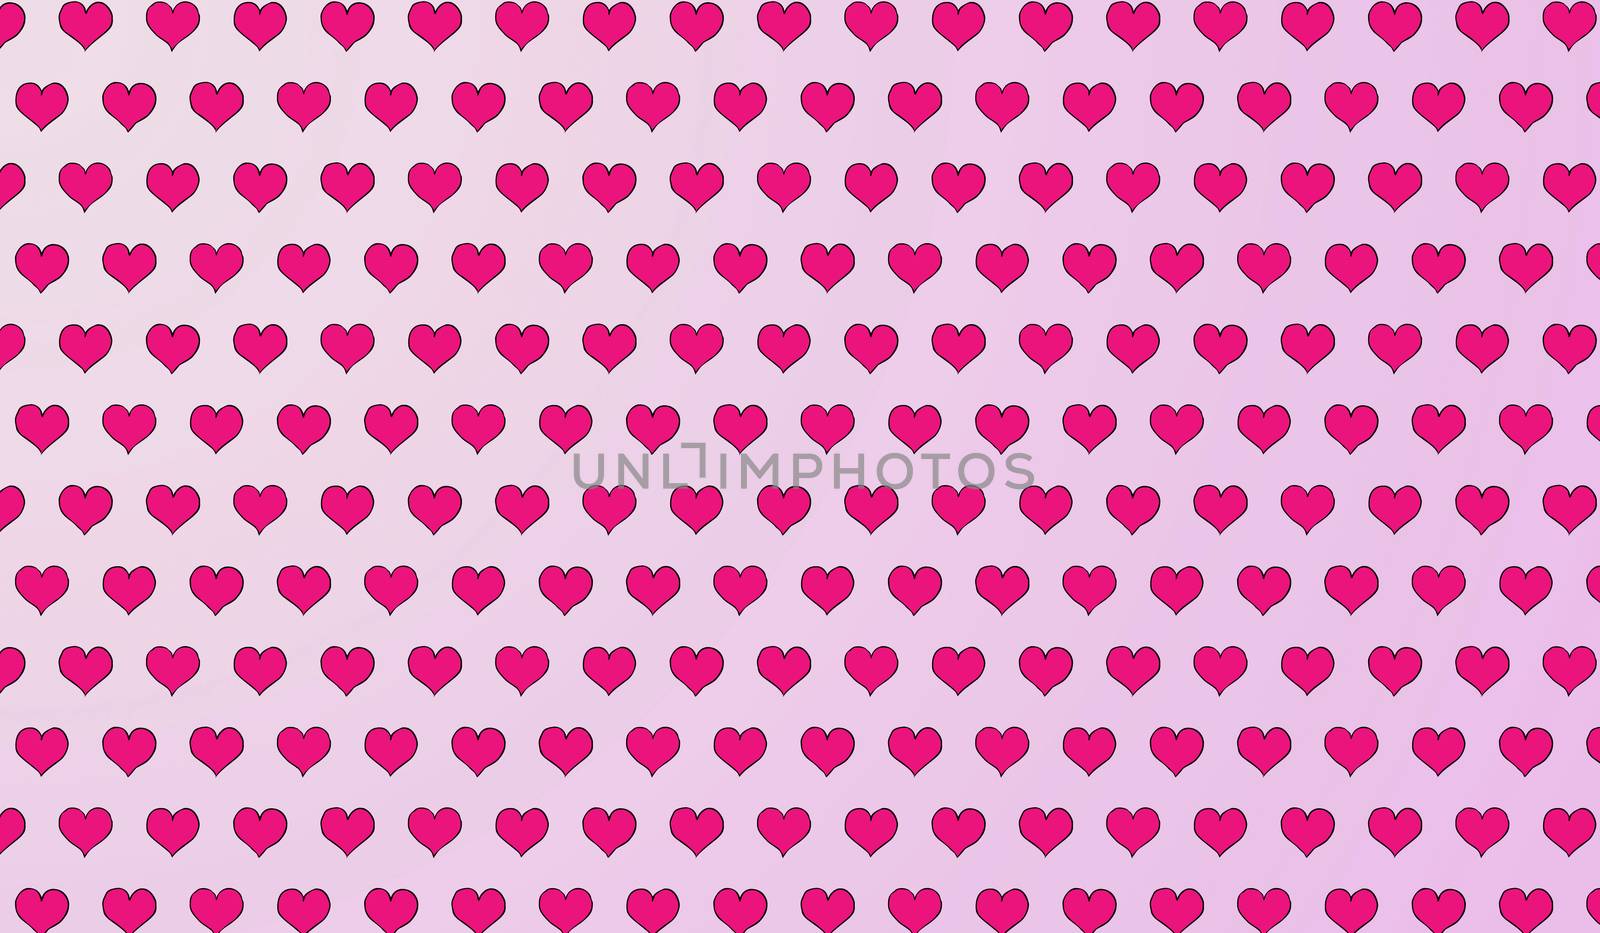 2d pink pattern of cartoon hearts on isolated background.